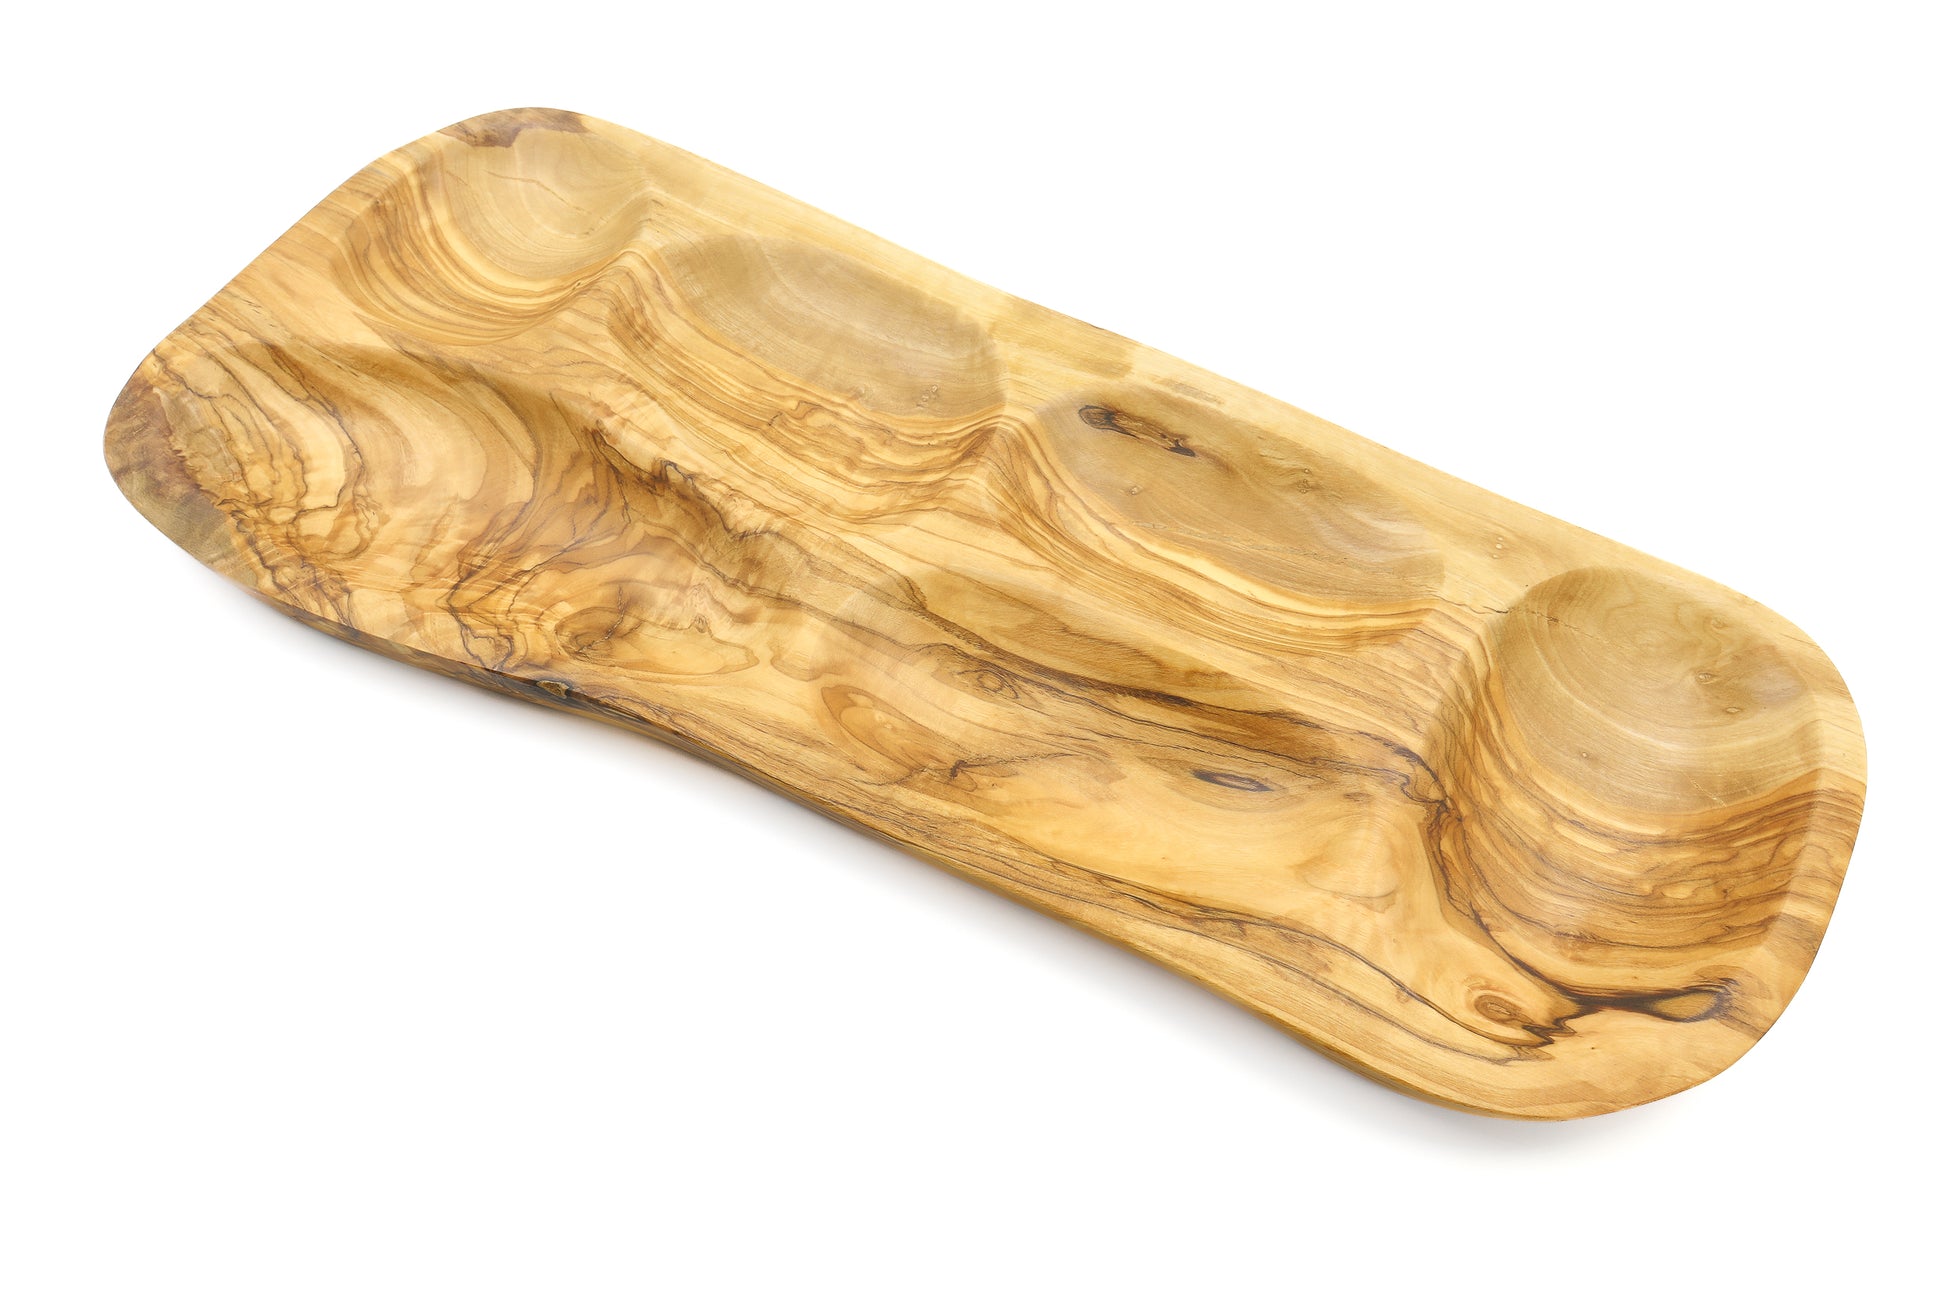 Irregular olive wood serving tray with separate sections for finger foods